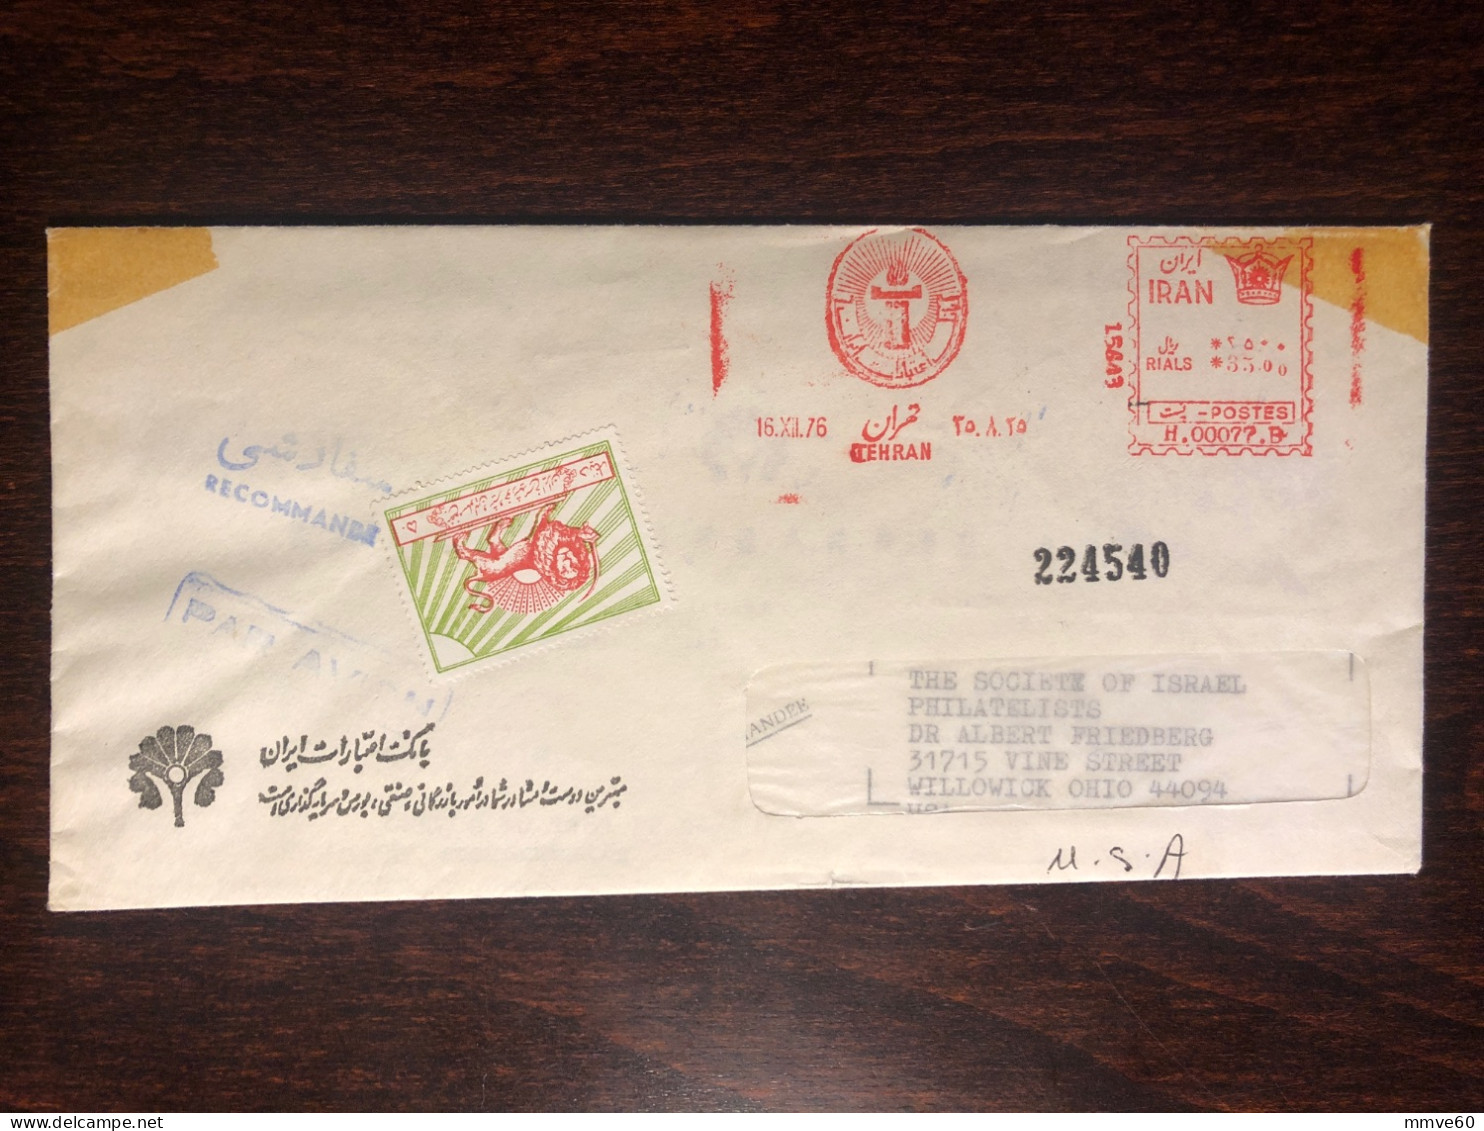 IRAN TRAVELLED COVER REGISTERED LETTER TO USA 1976 YEAR RED LION RED CROSS HEALTH MEDICINE - Iran